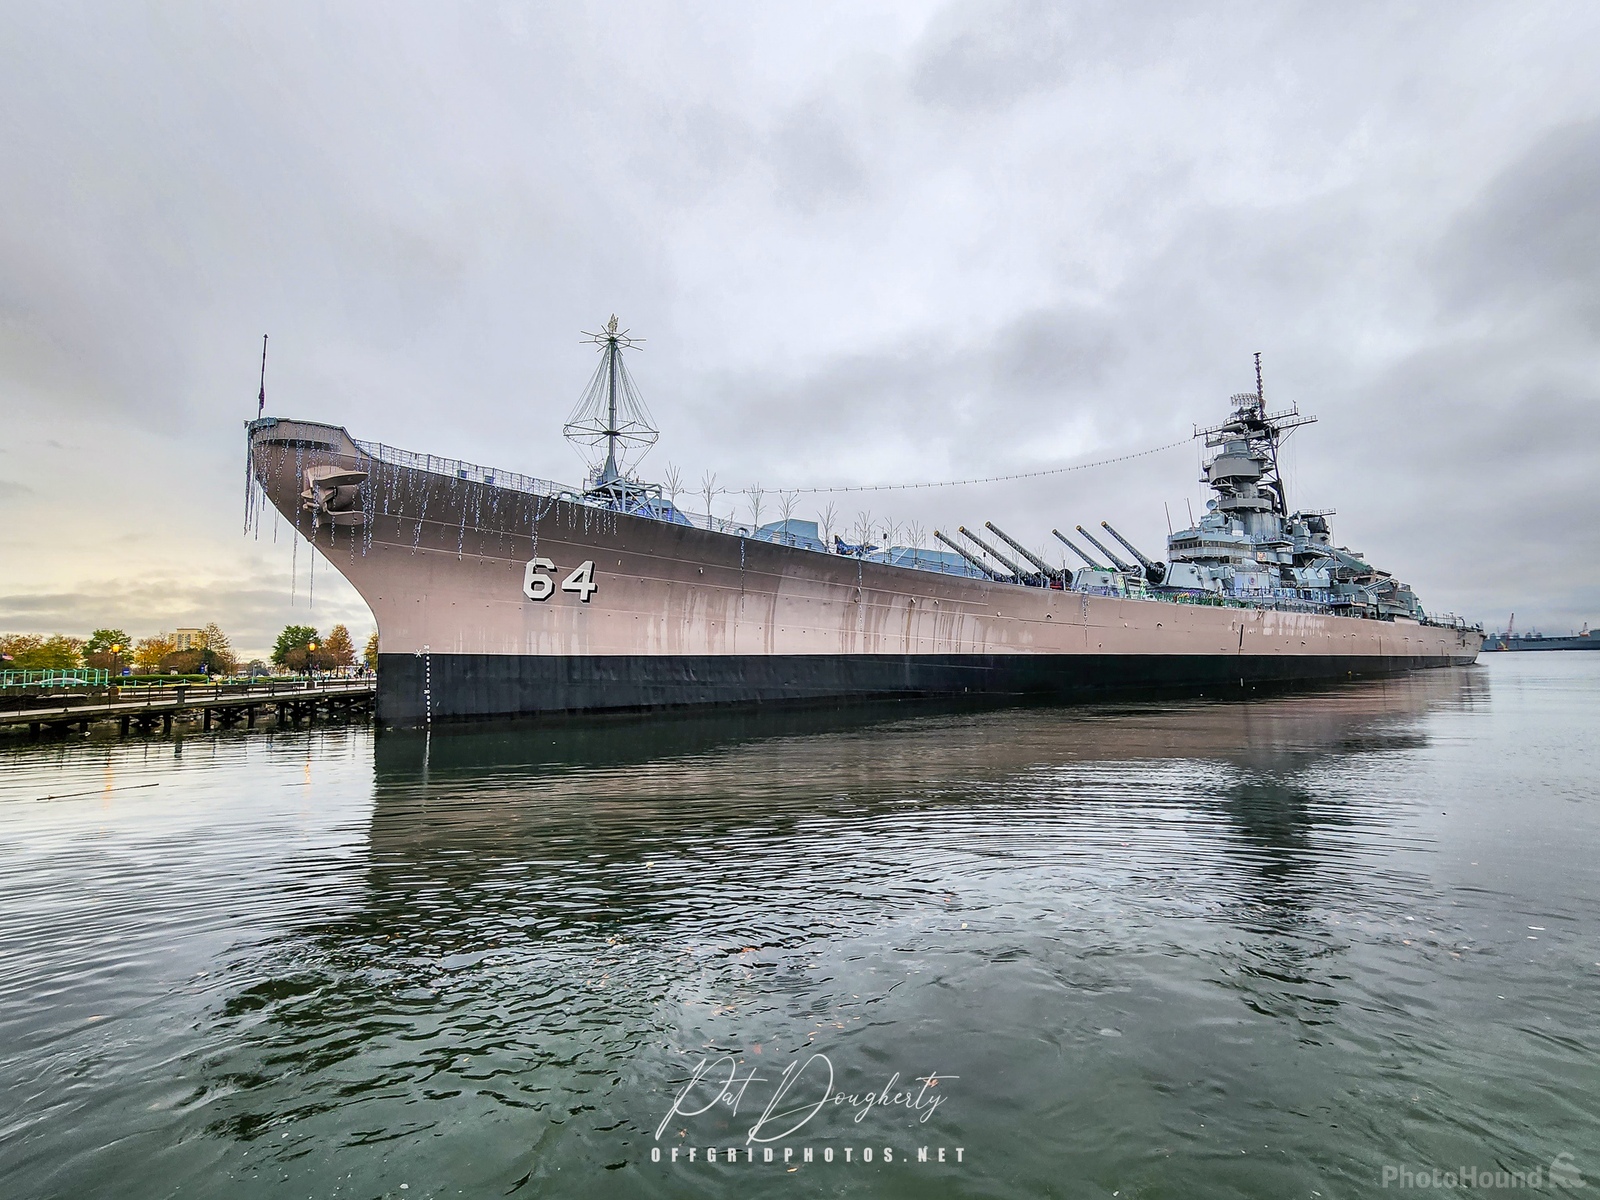 Image of BB-64 USS Wisconsin by Patrick Dougherty